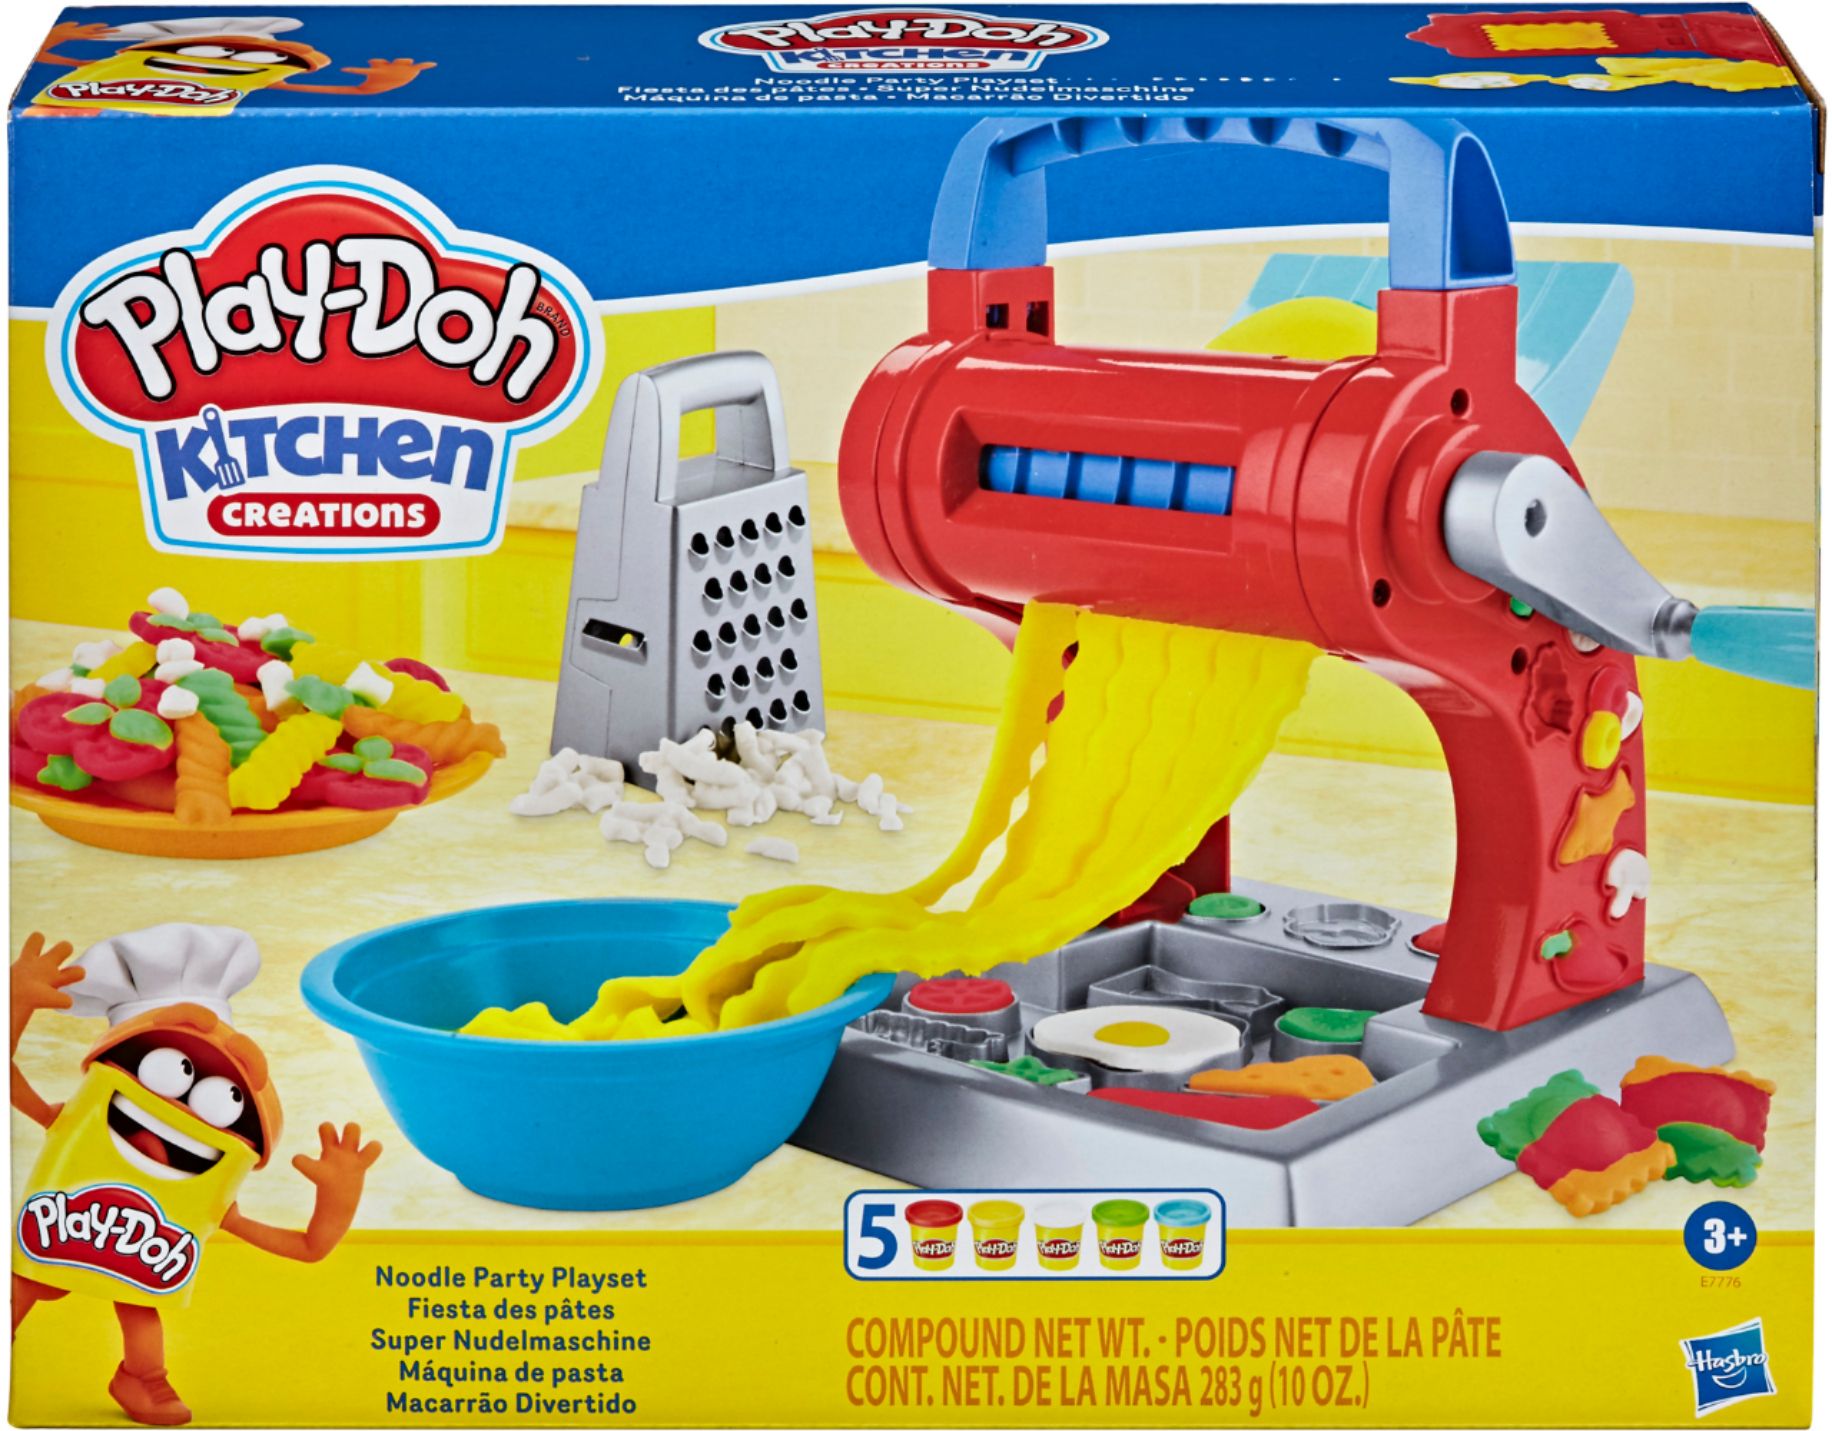 Best Buy: Play-Doh Kitchen Creations Noodle Party Playset E7776